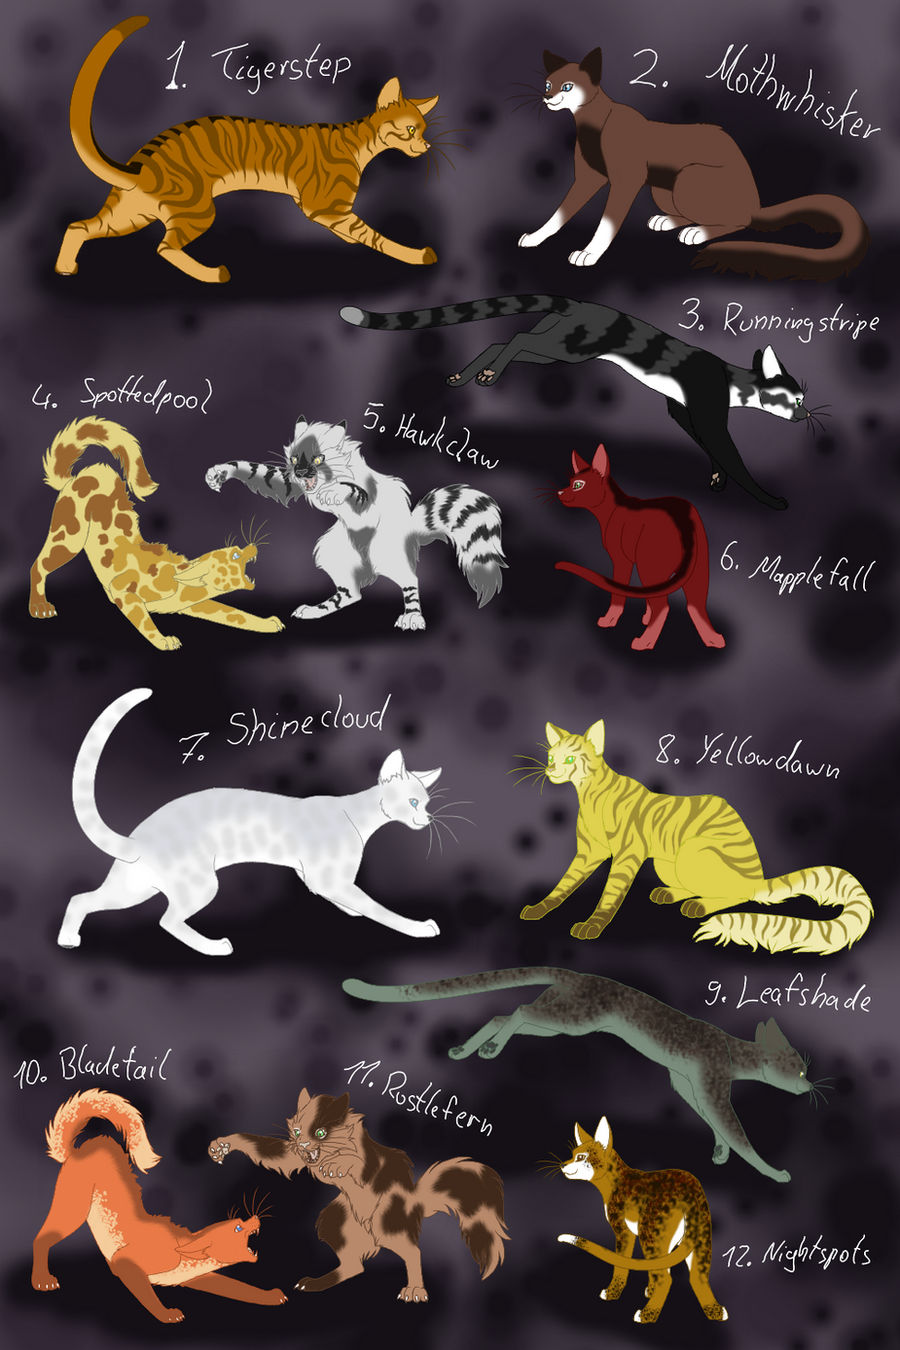 Warrior Cats by Kityote on DeviantArt